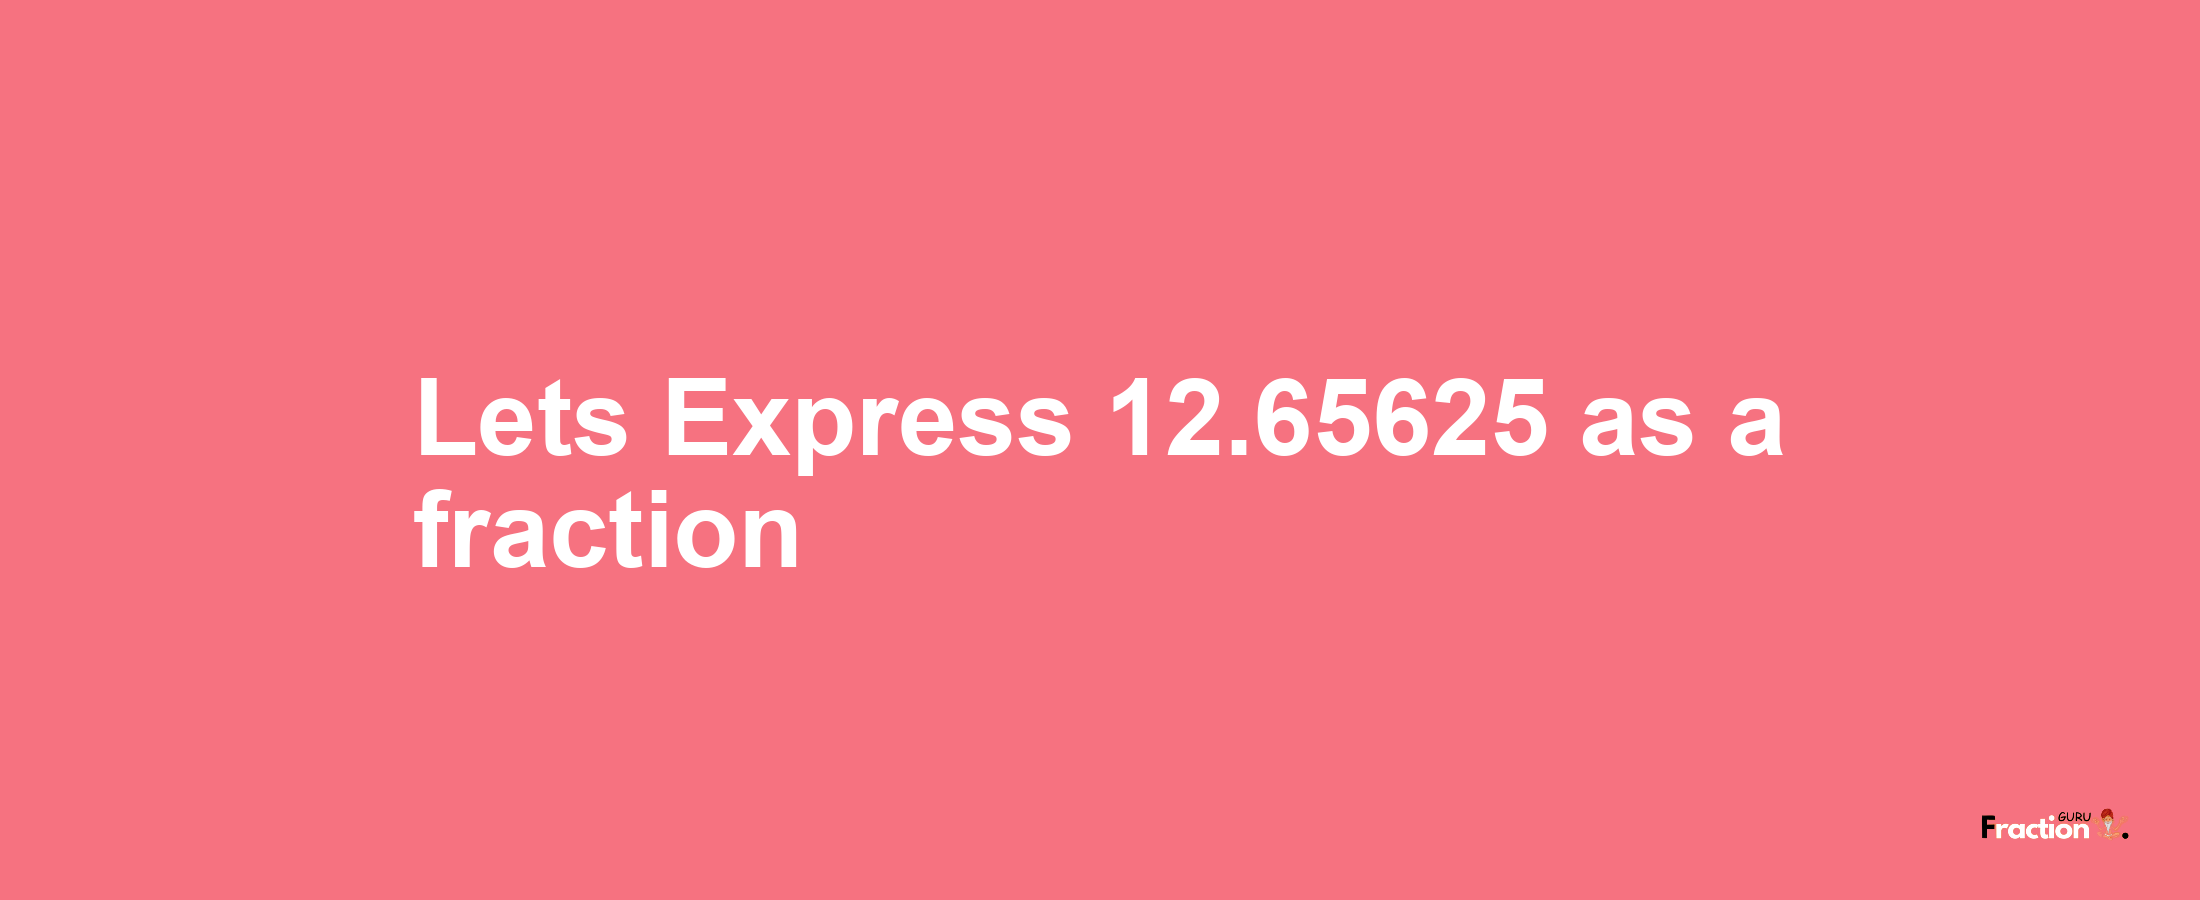 Lets Express 12.65625 as afraction